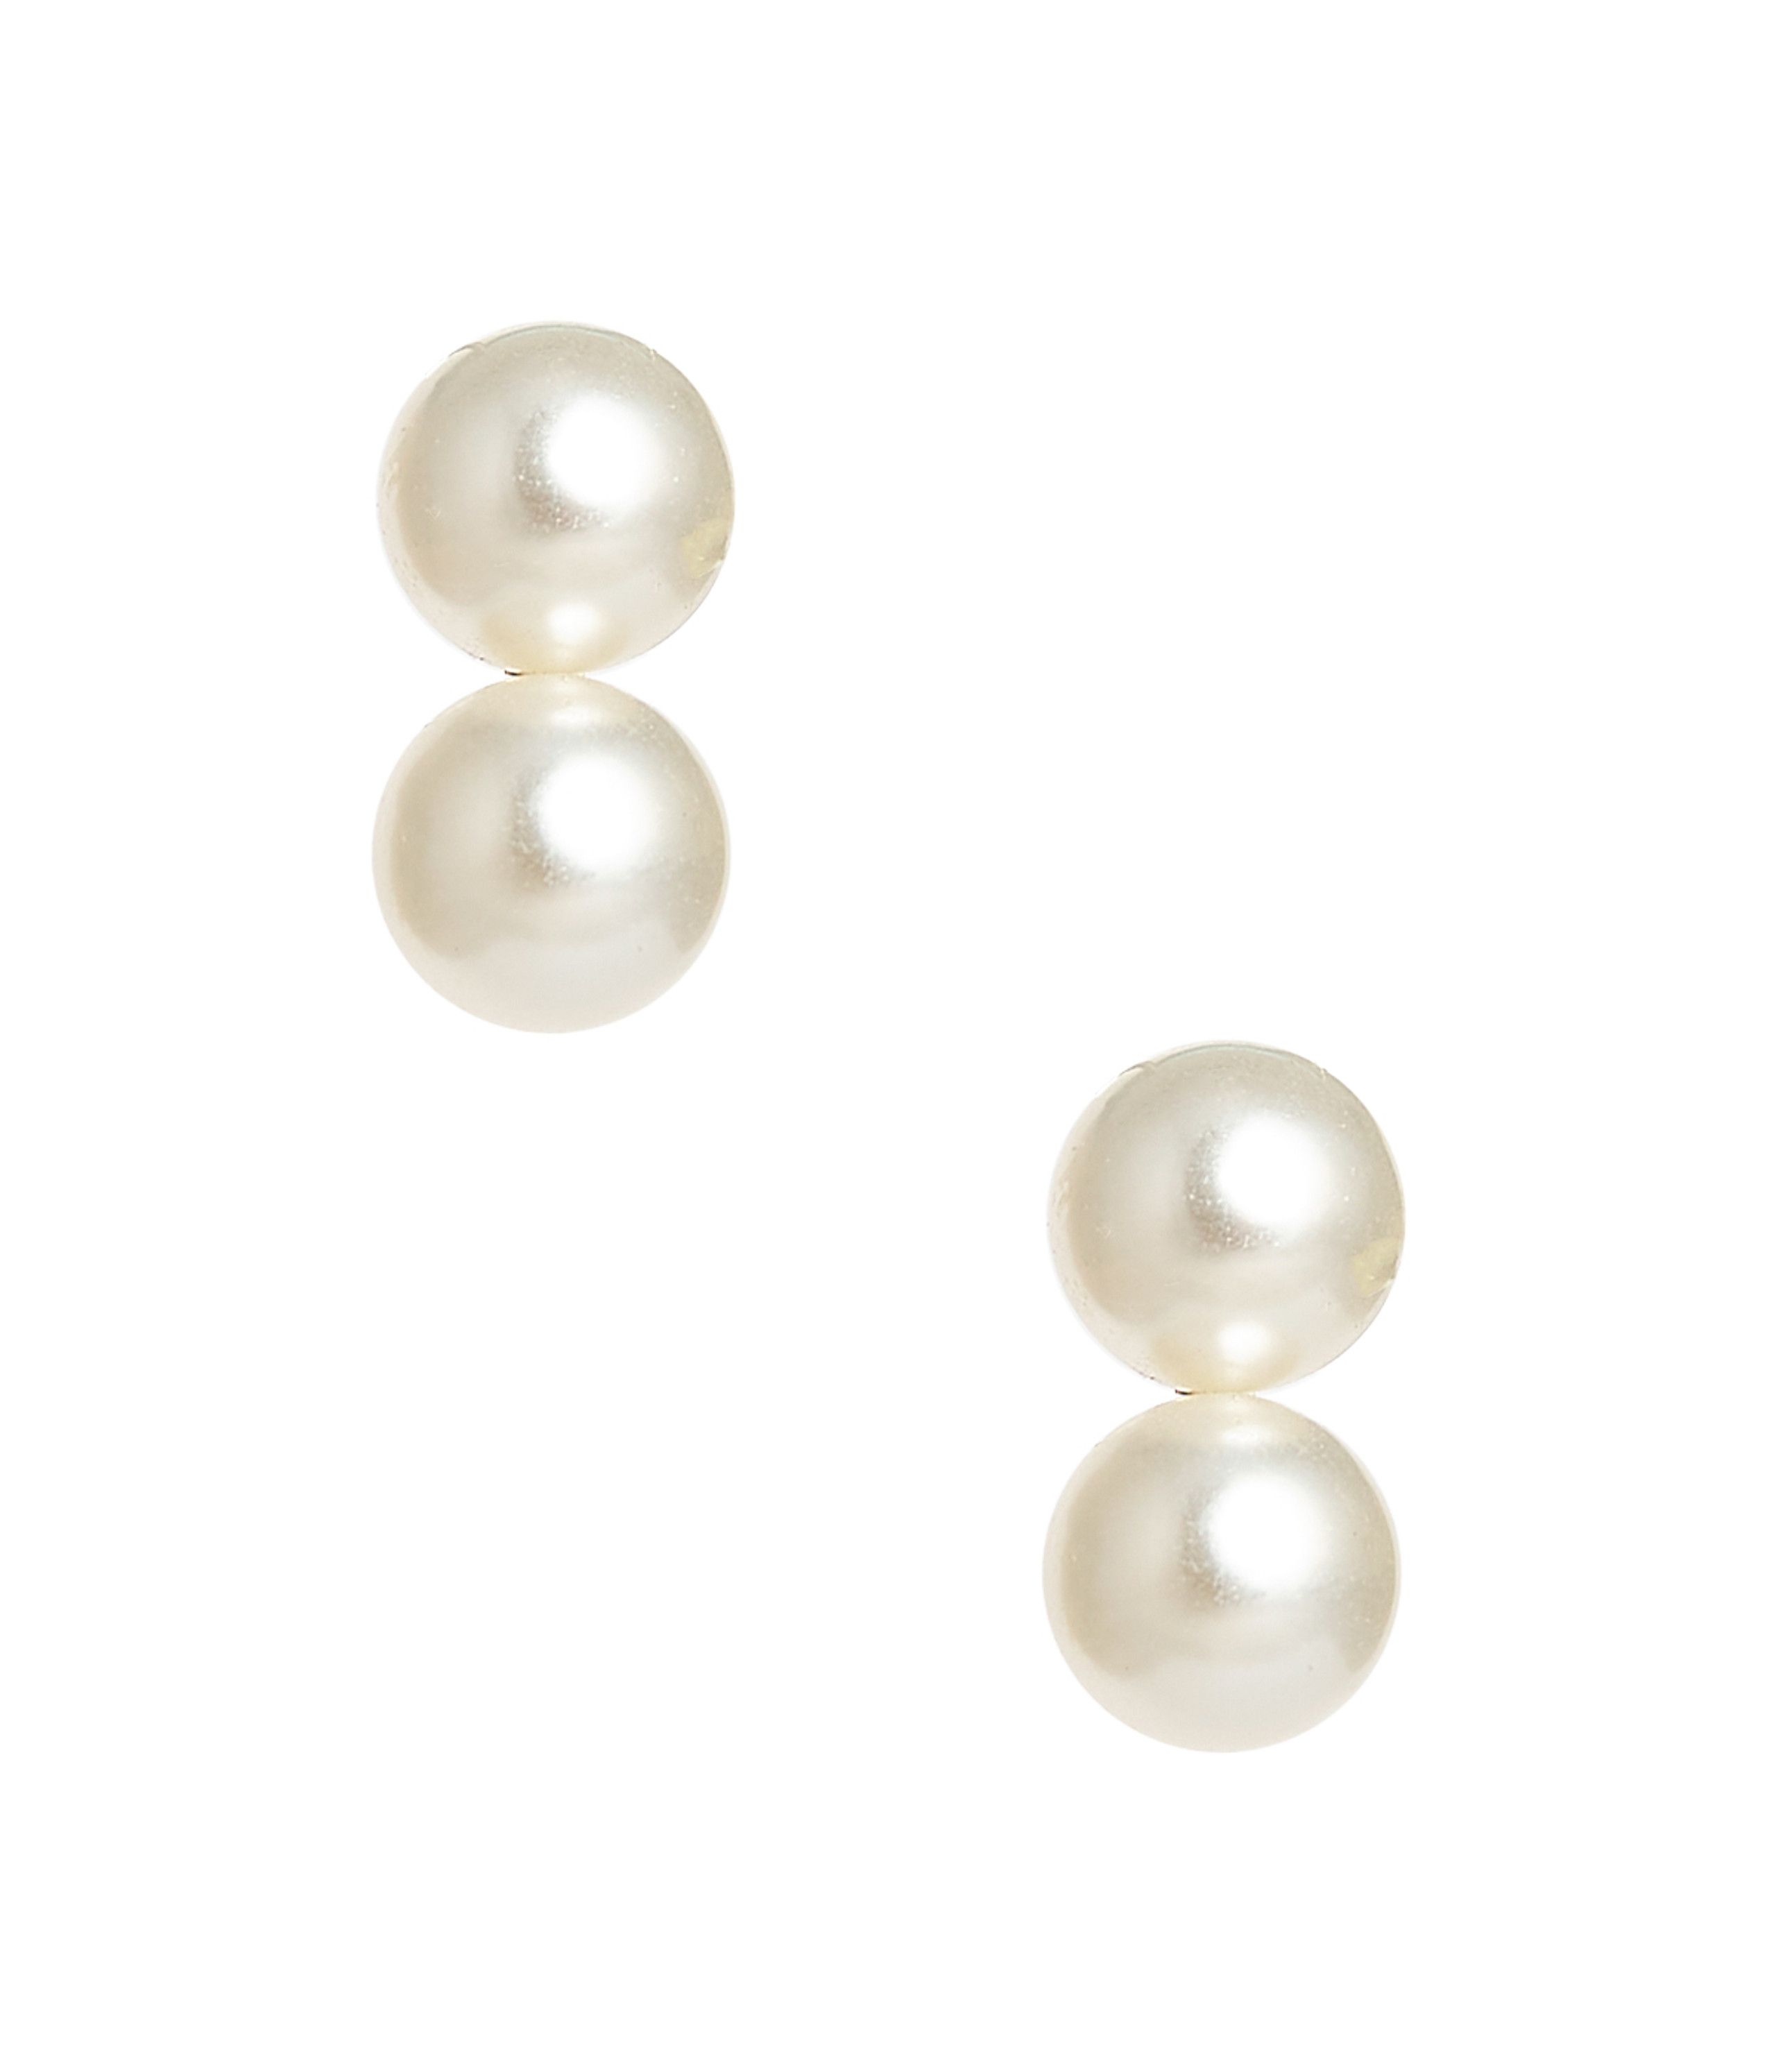 Large Belle - Double Pearl earrings - Belle of  the Ball - PreOrder | Lisi Lerch Inc